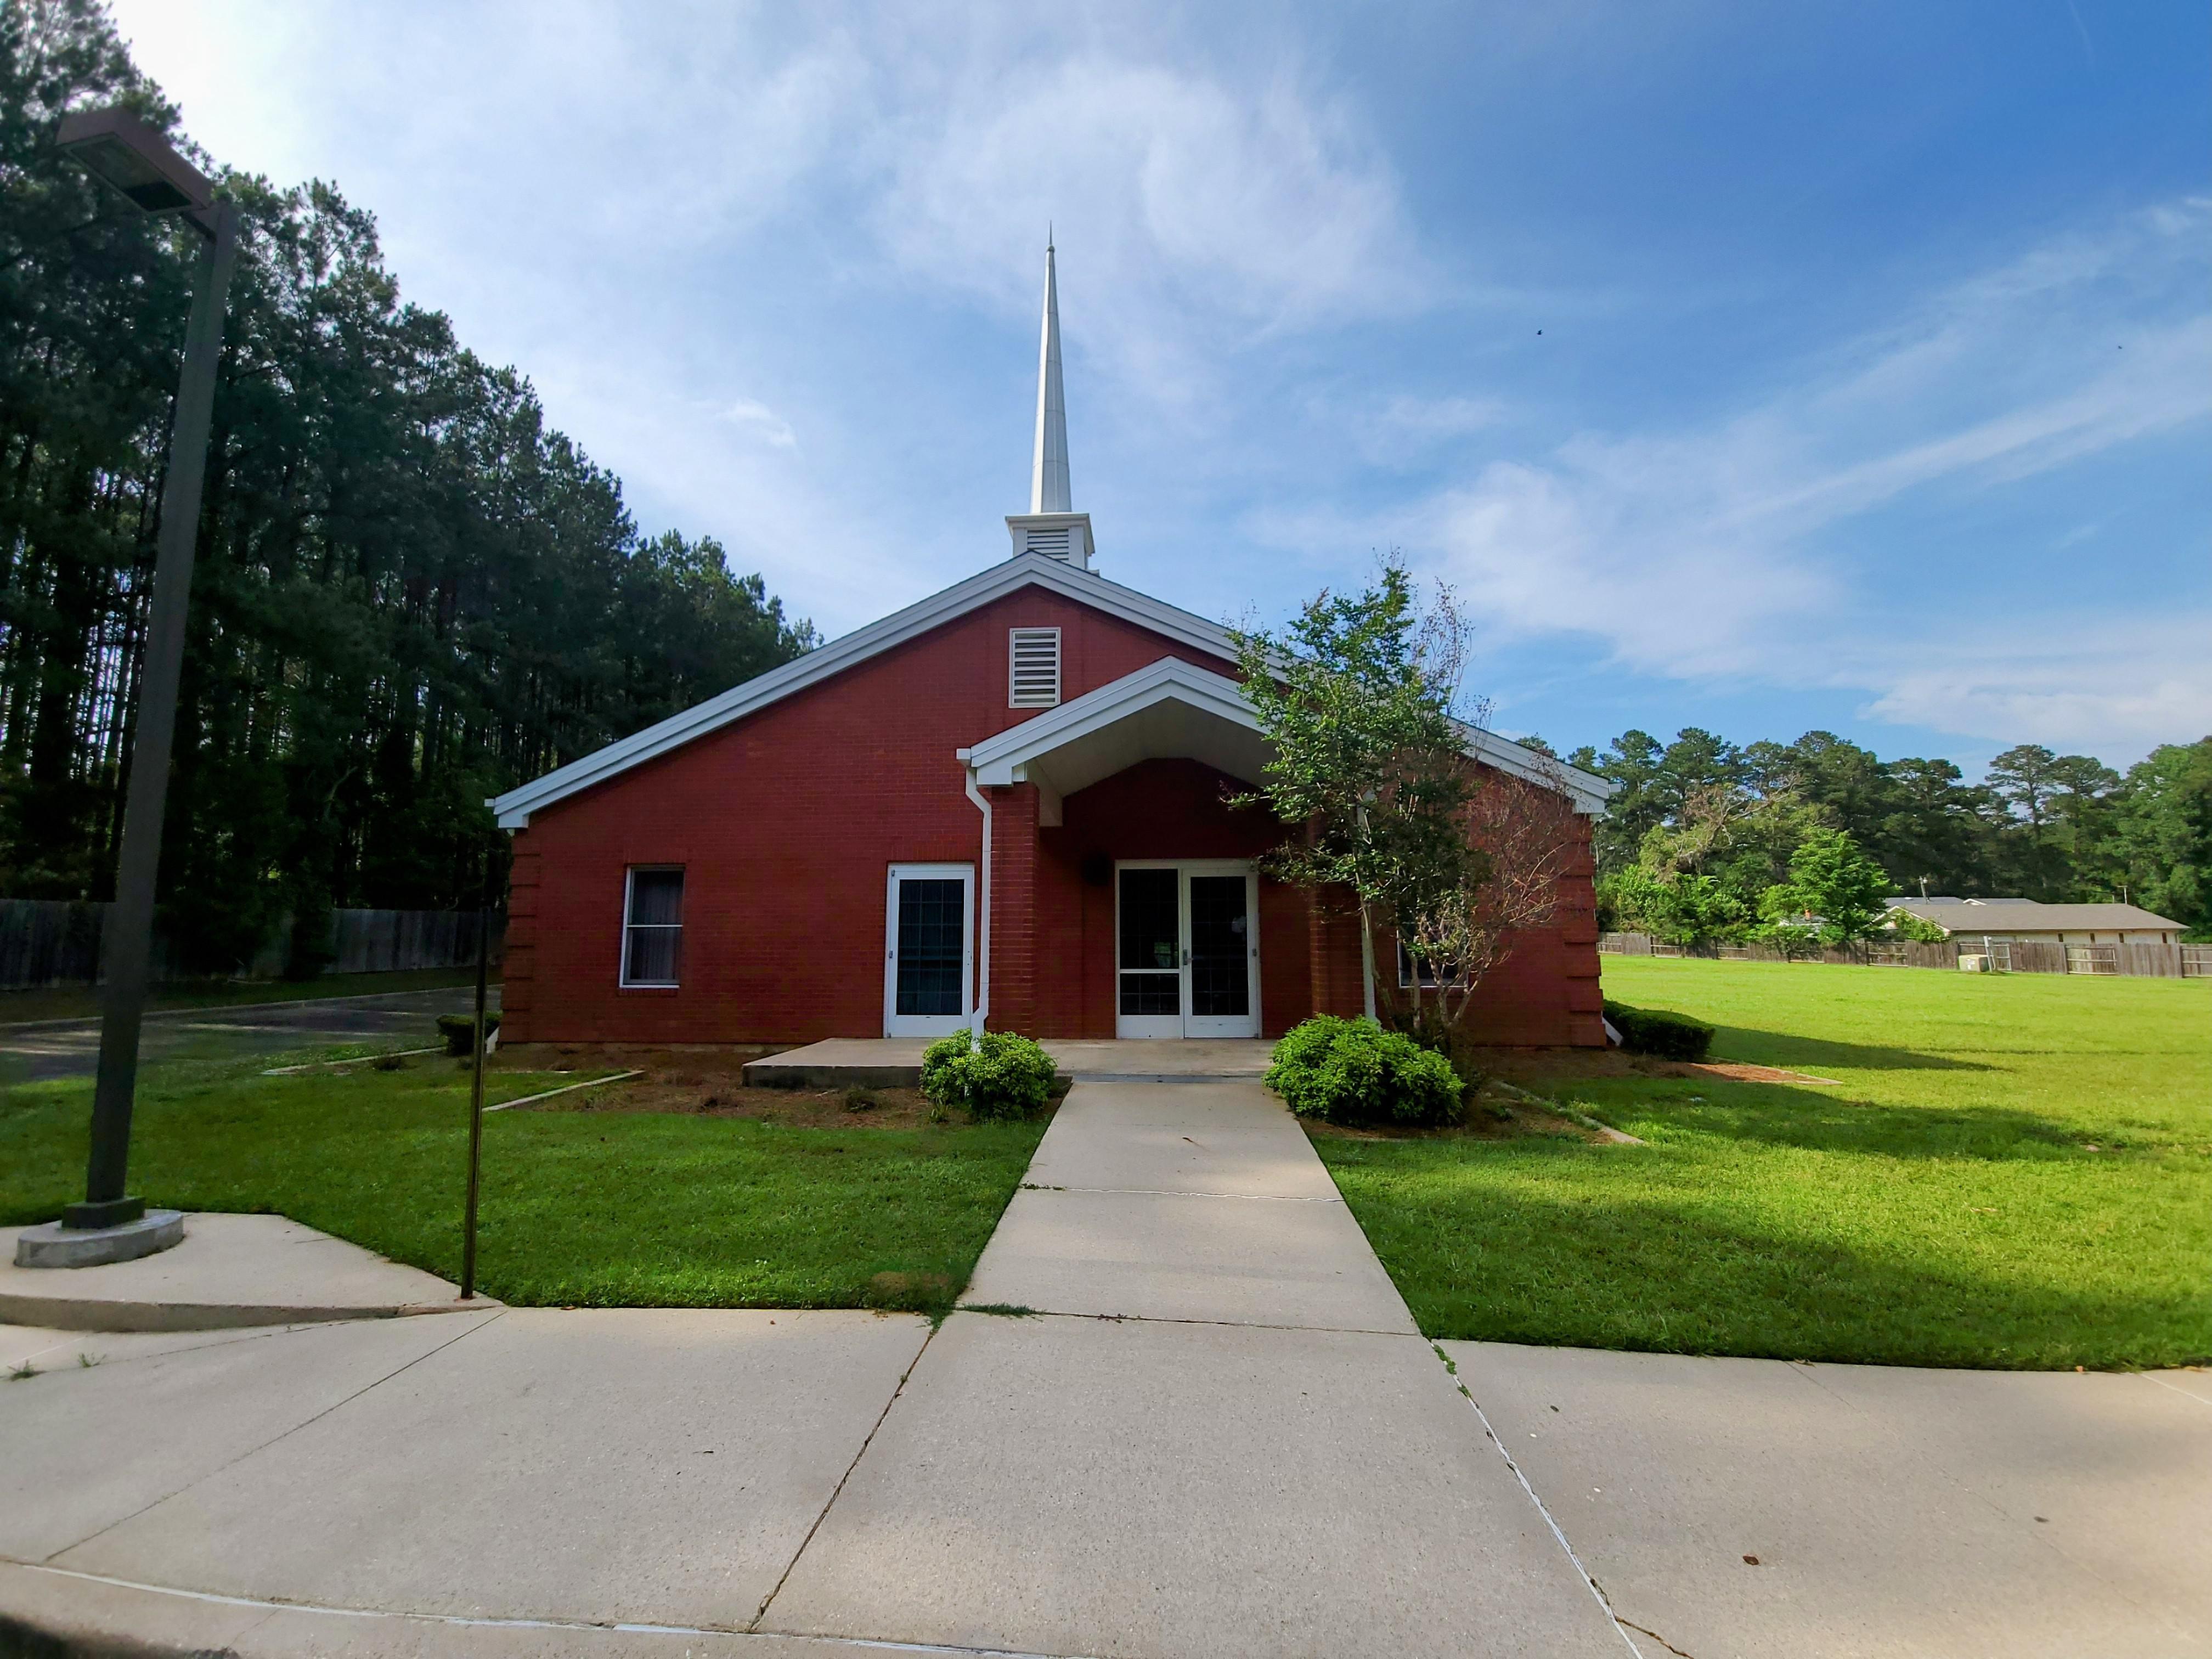 Coushatta Branch Meeting House of The Church of Jesus Christ of Latter-day Saints located at 1900 Bessie Street in Coushatta Louisiana